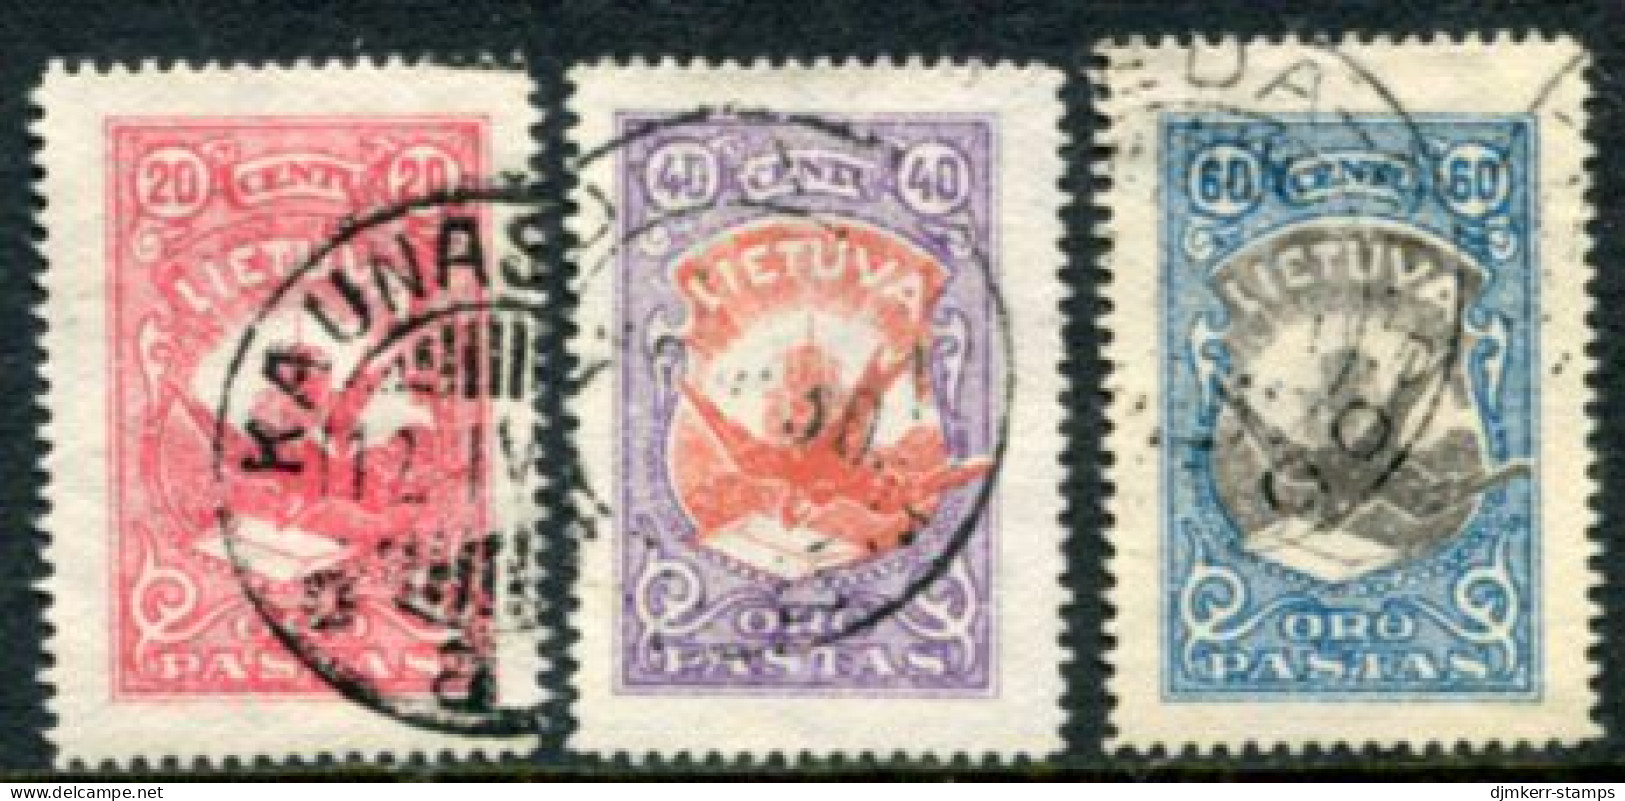 LITHUANIA 1926 Airmail Definitive Used. Michel 243-45 - Lithuania